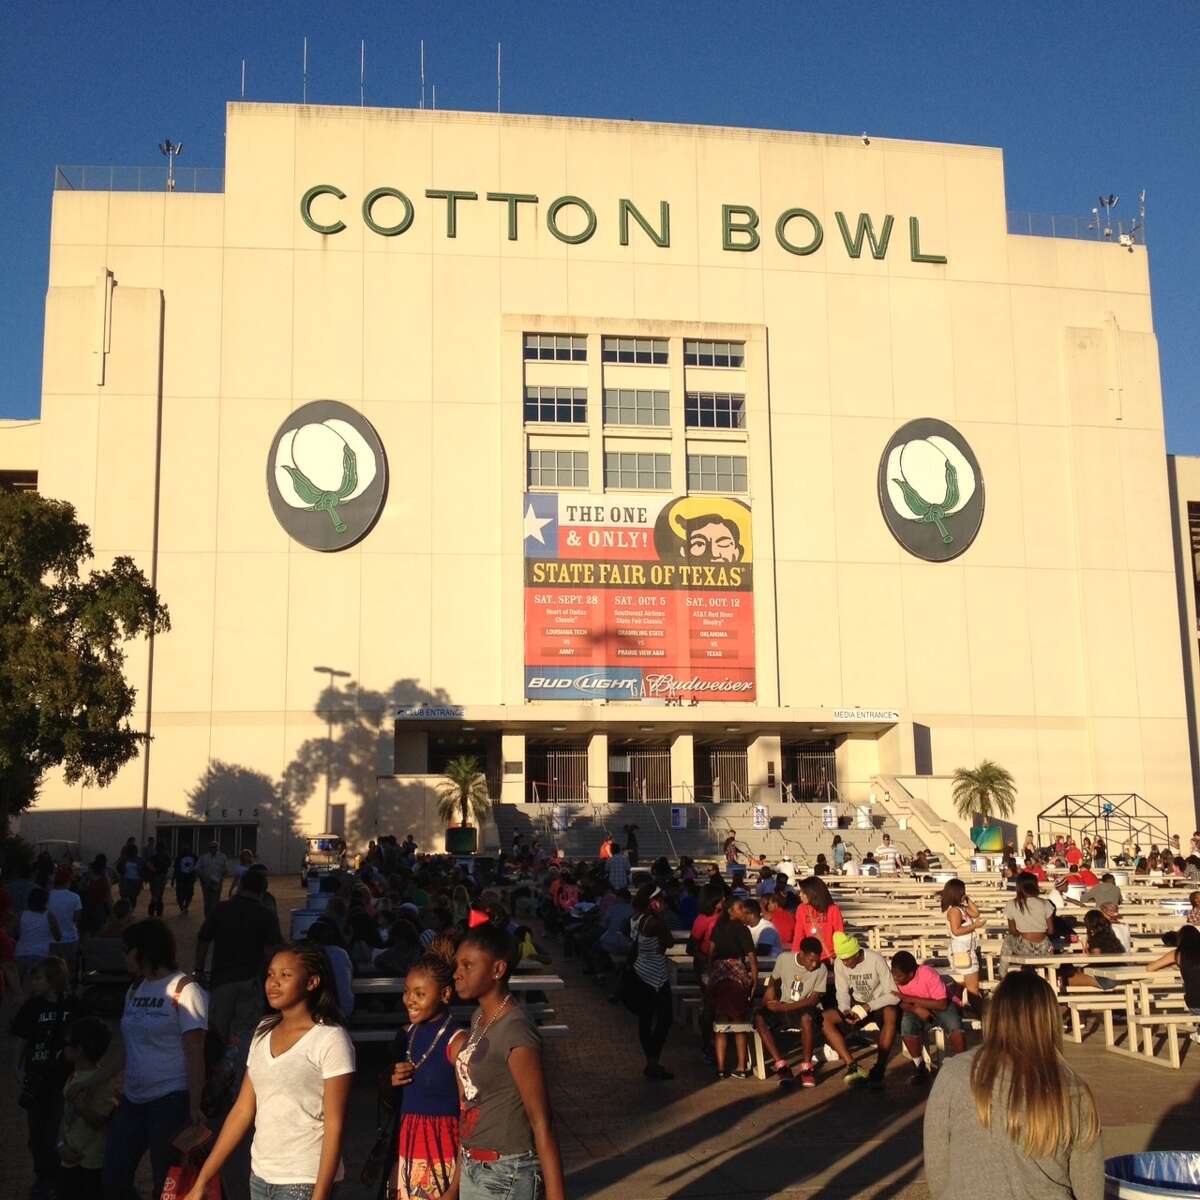 Shelby Powers of Justin was sure he named the Cotton Bowl.